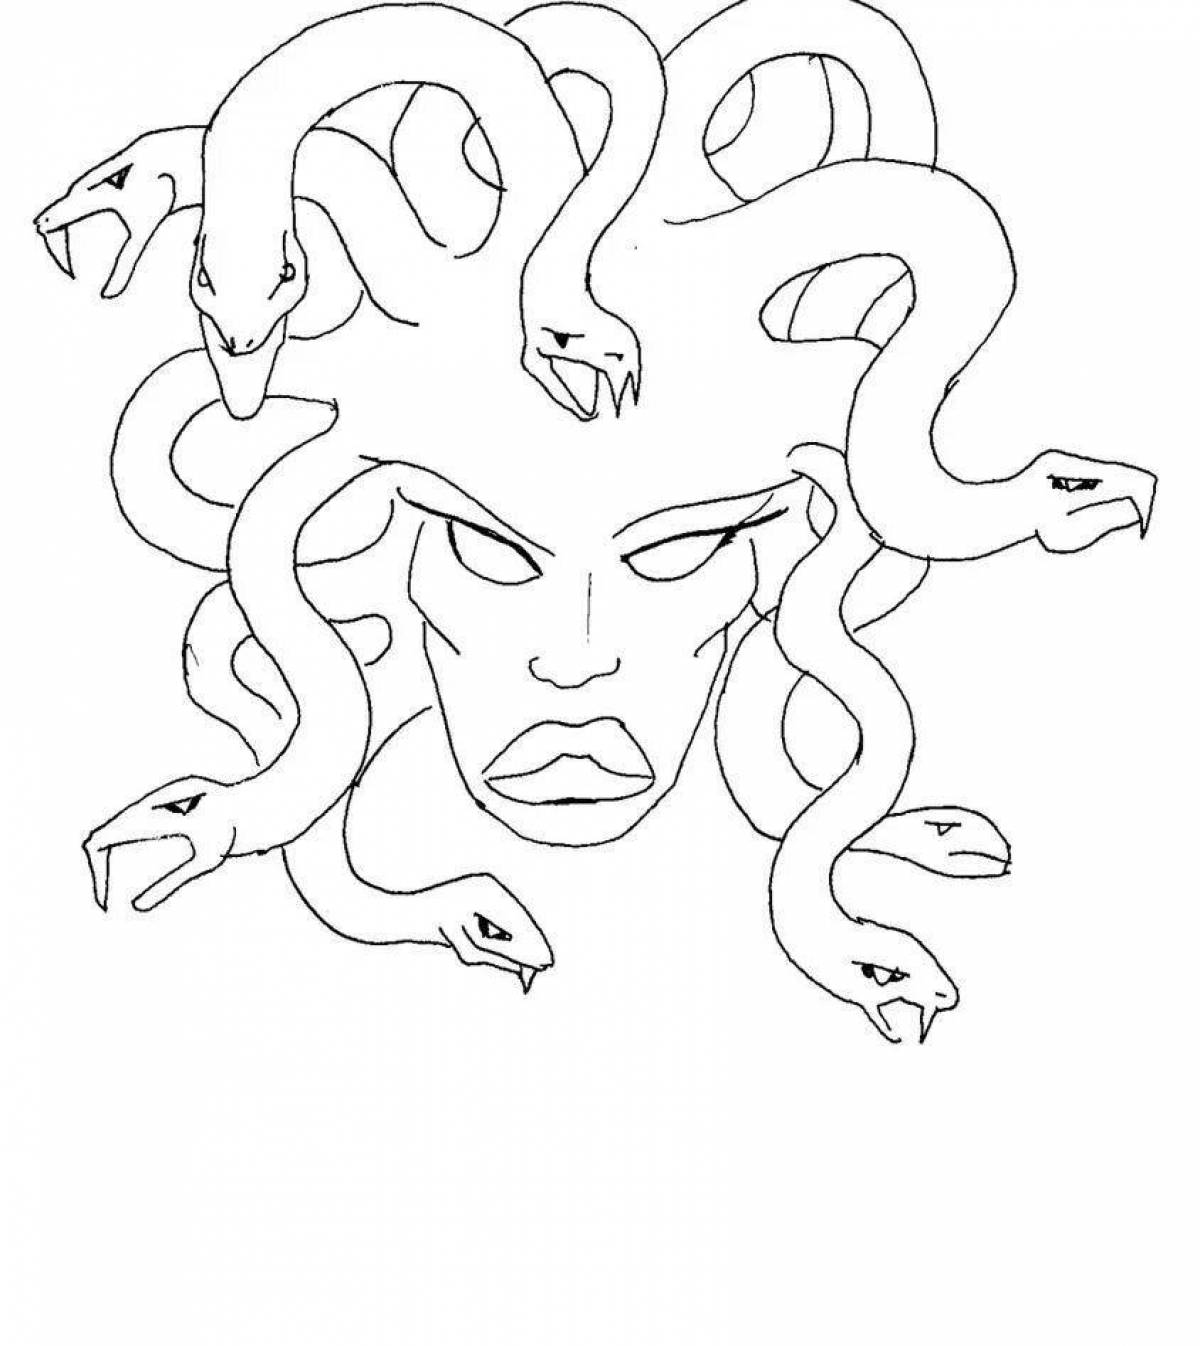 Awesome gorgon medusa coloring page